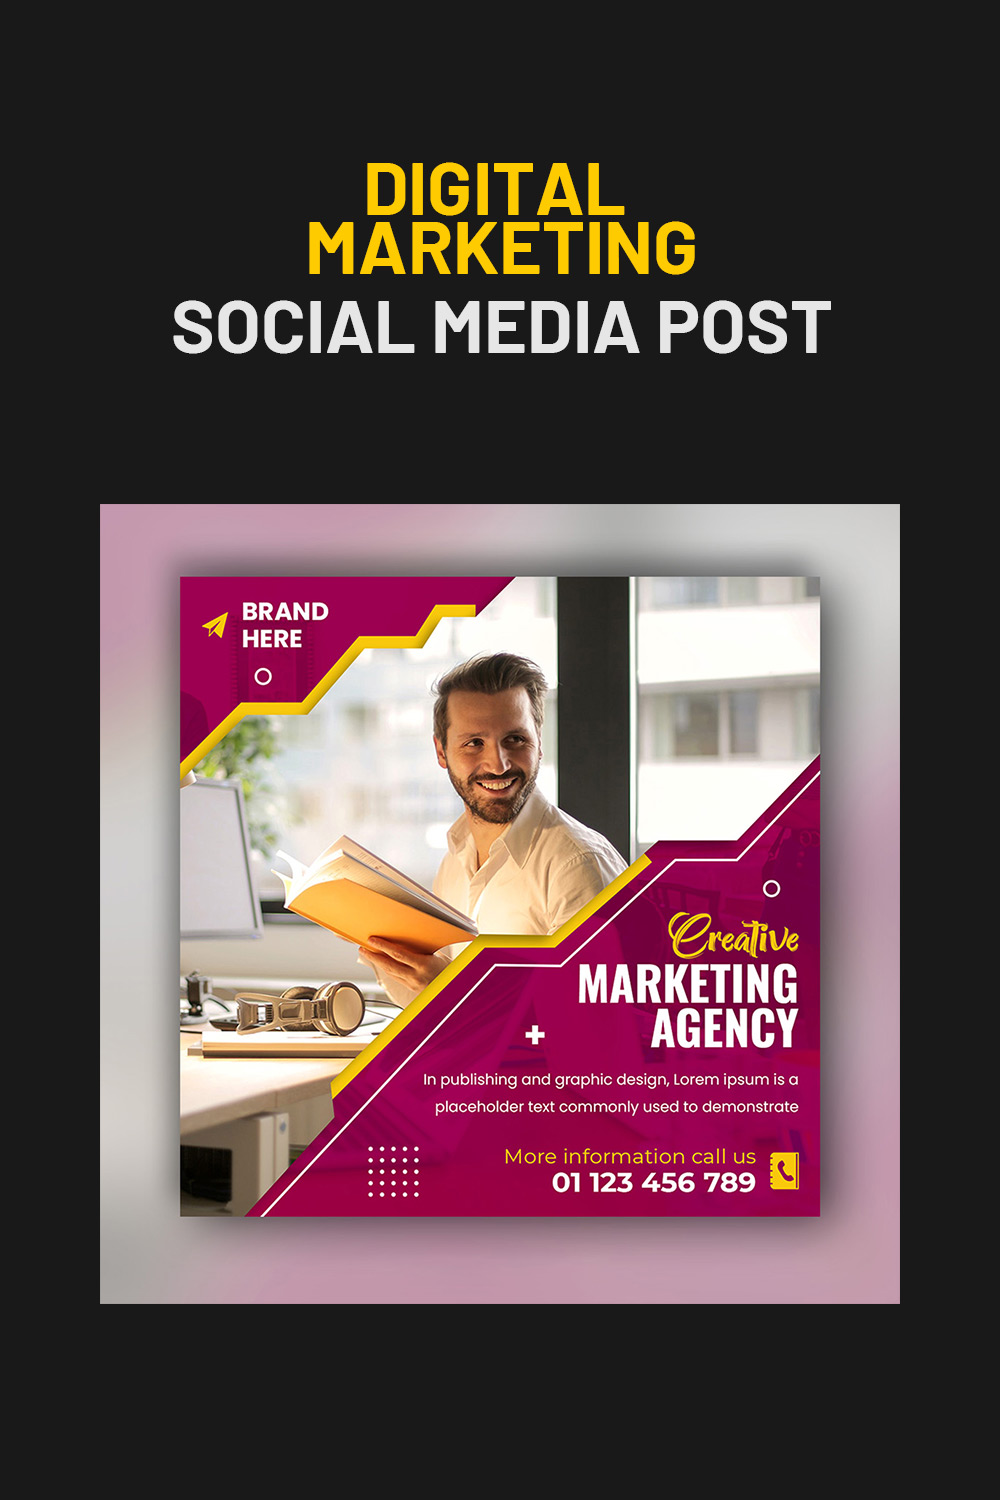 Digital marketing agency webinar or corporate social media post template only-$4 pinterest preview image.